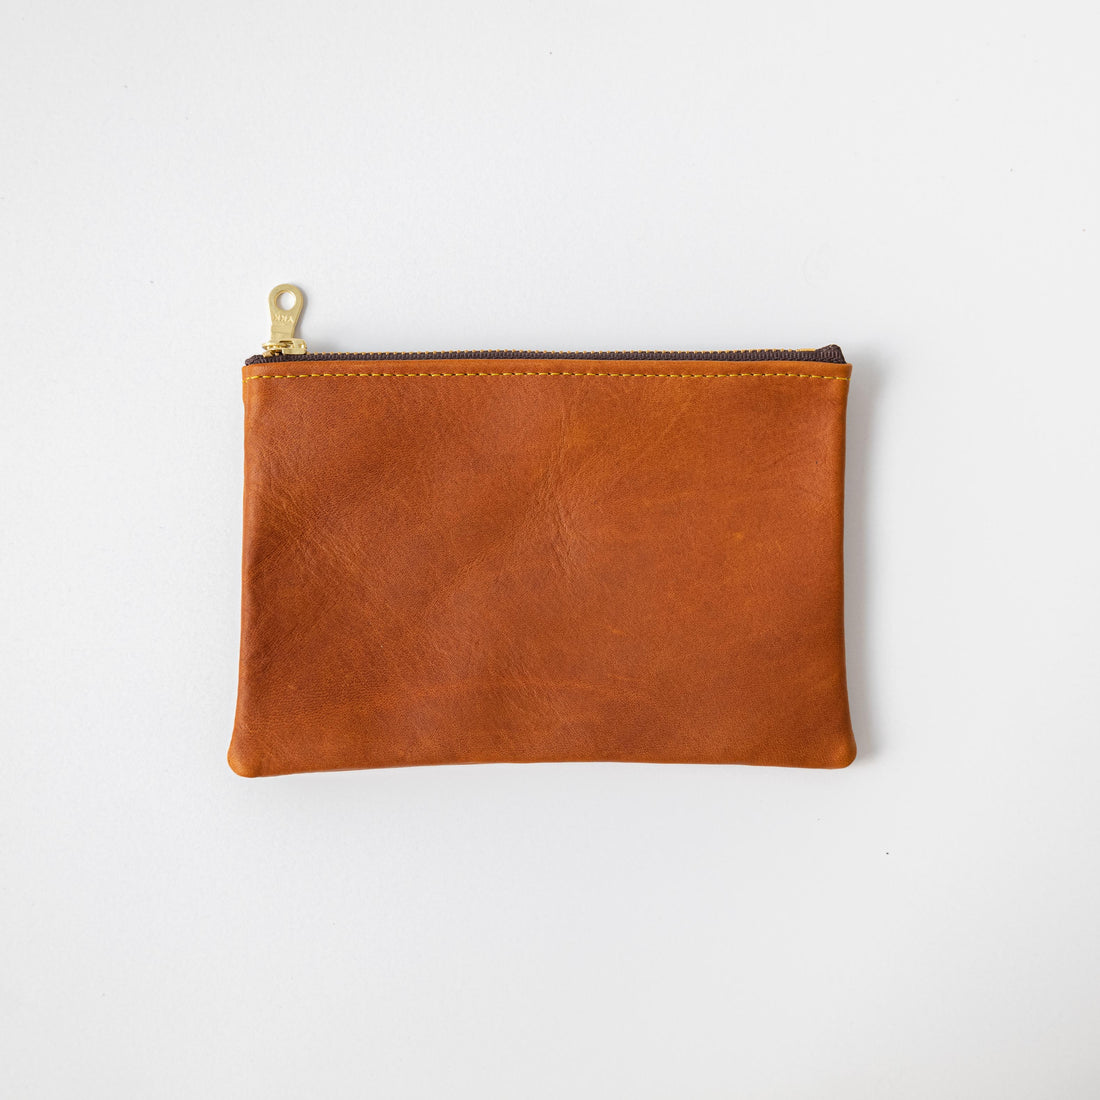 Women's coin purse in leather color cypress